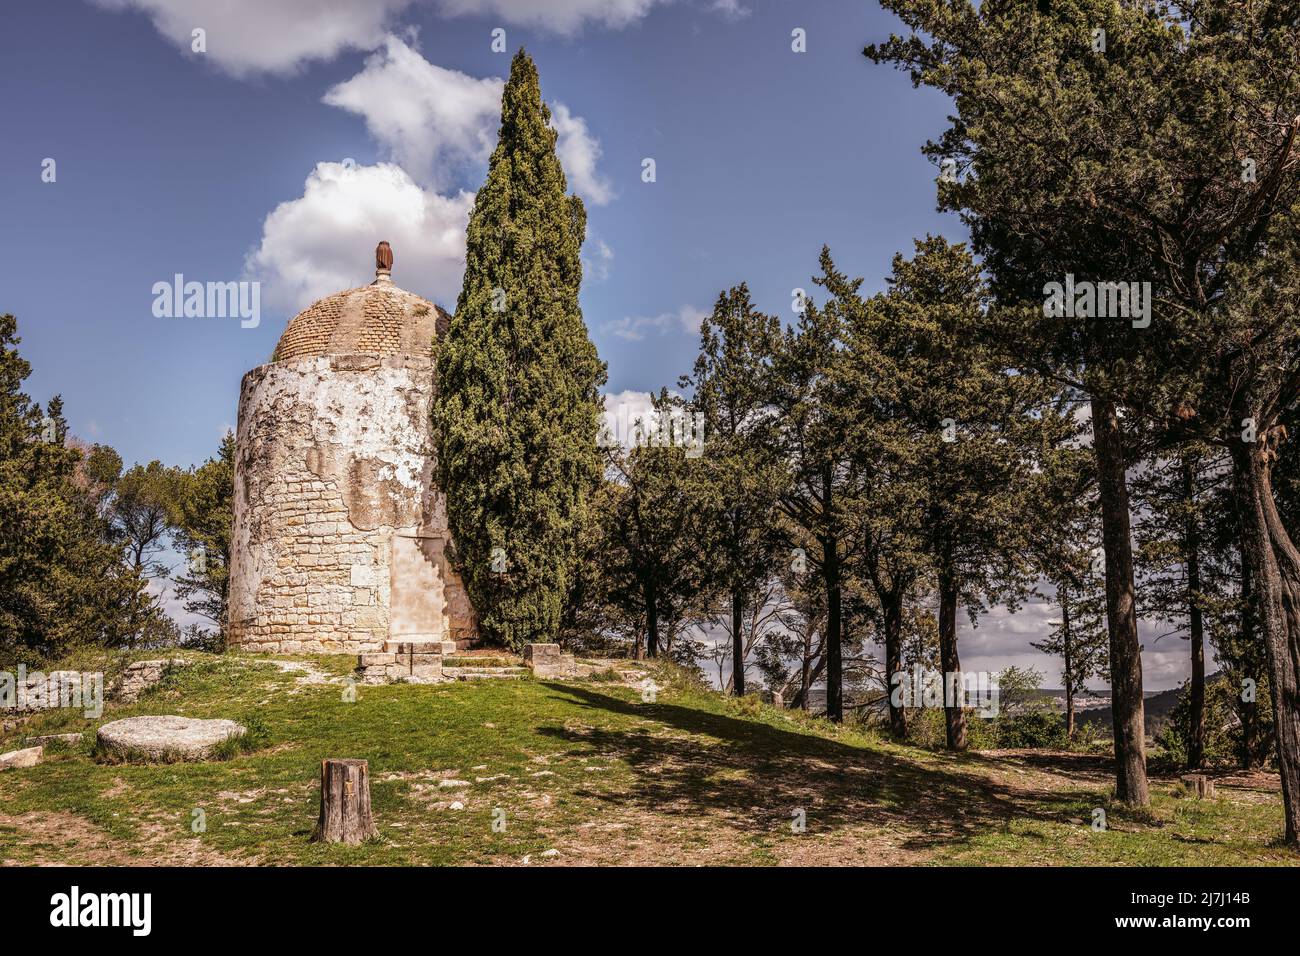 Wheat mill converted into a mausoleum built on the site of the castle of Calvisson, Gard, South of France Stock Photo